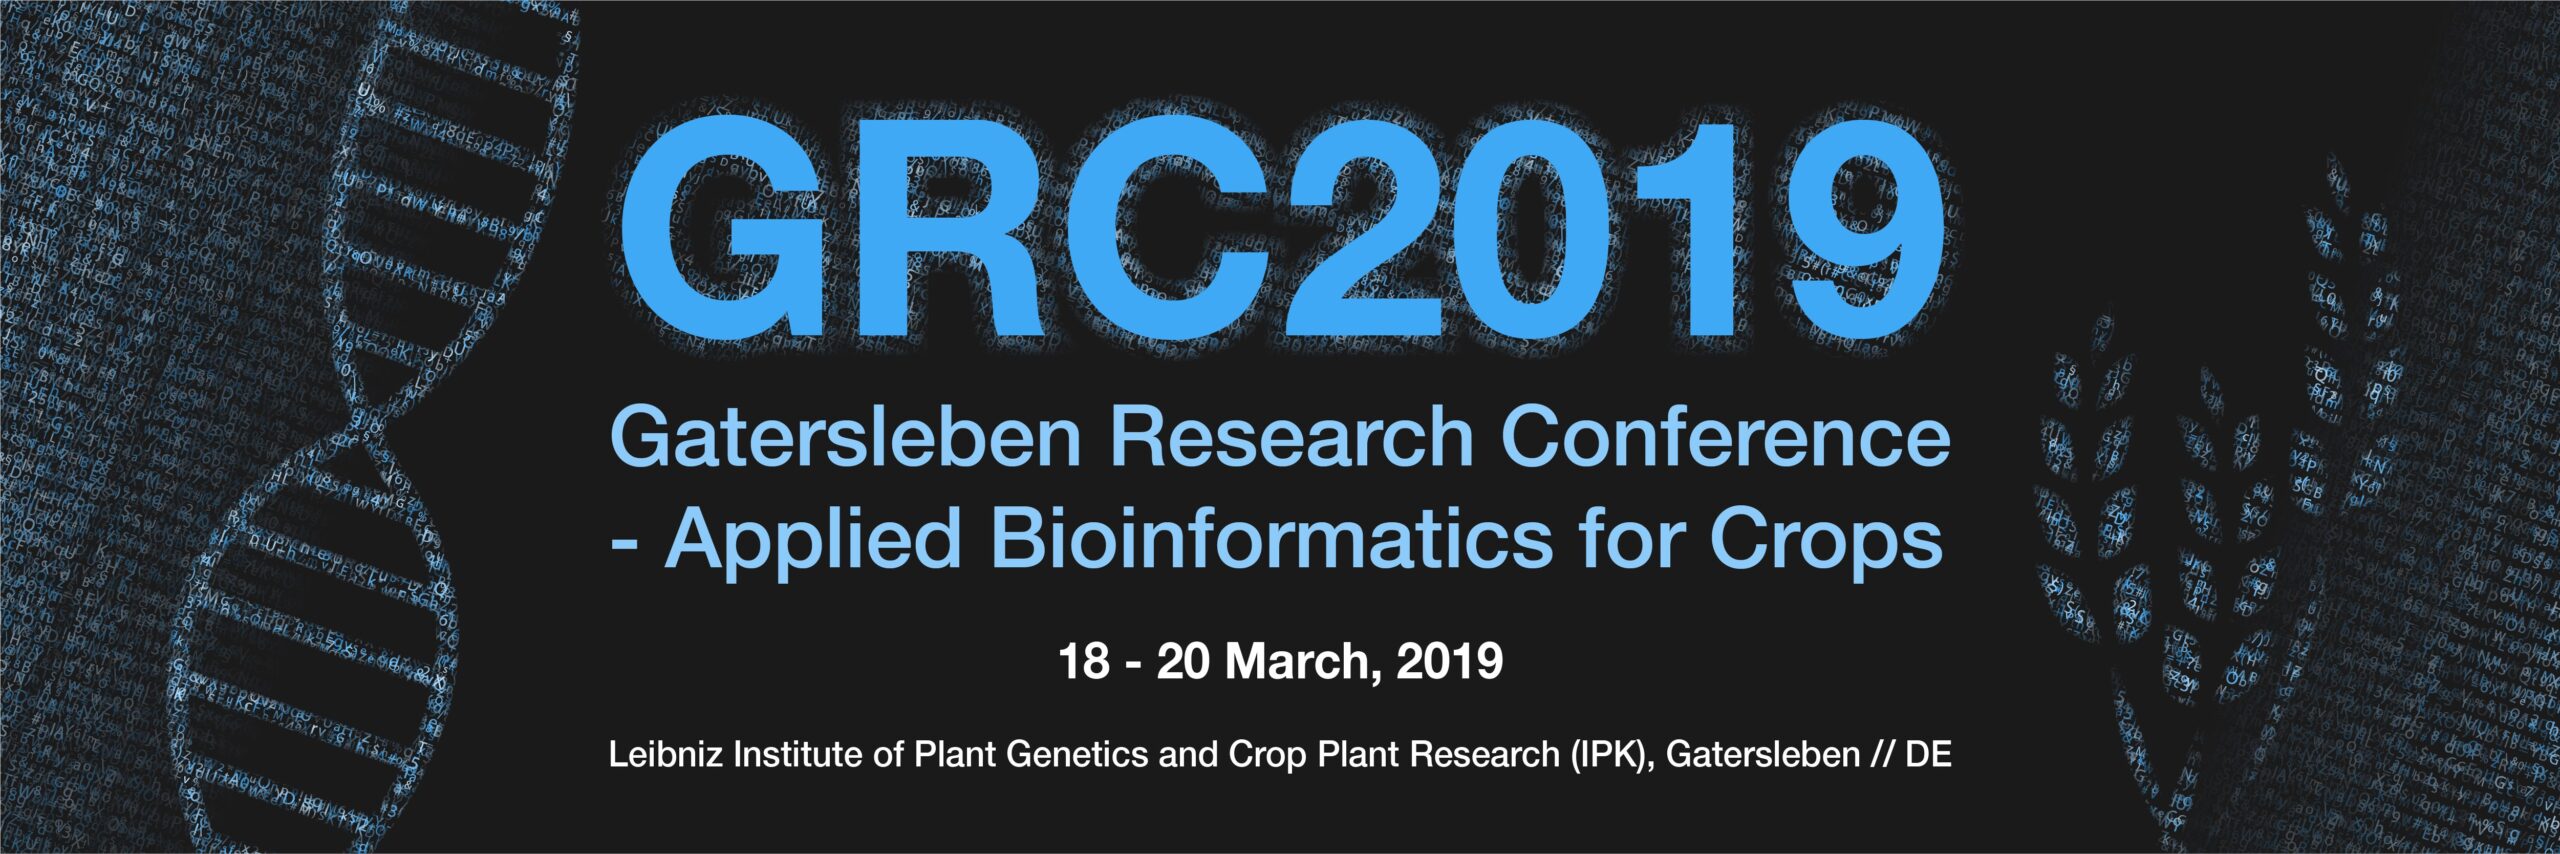 Gatersleben Research Conference – Applied Bioinformatics for Crops, 18-20 March 2019